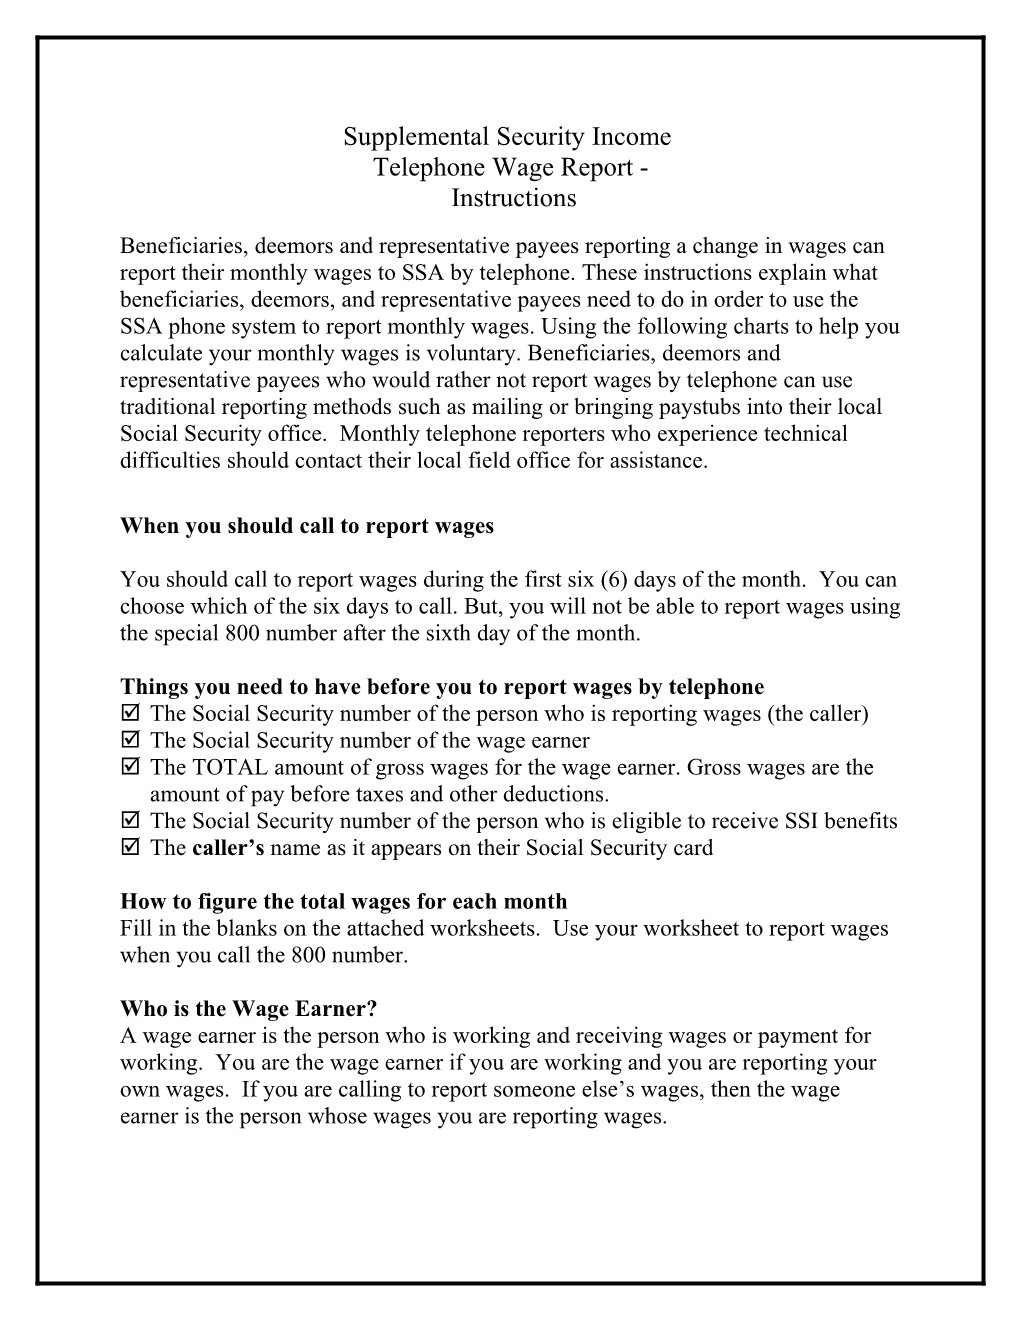 Supplemental Security Income Telephone Wage Report Worksheet